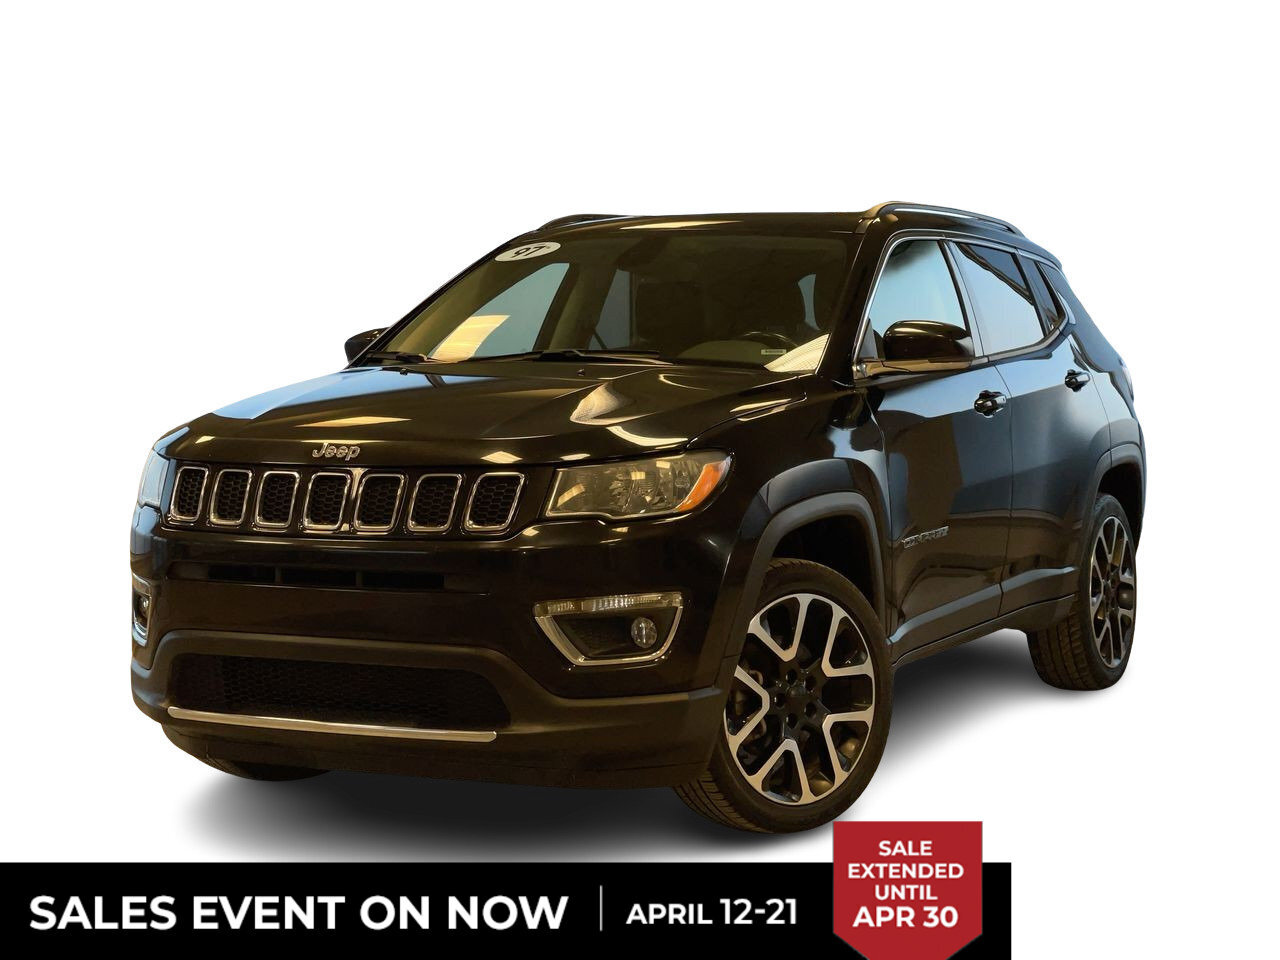 2020 Jeep Compass 4x4 Limited Leather, Moonroof, Navigation, Rear Ca